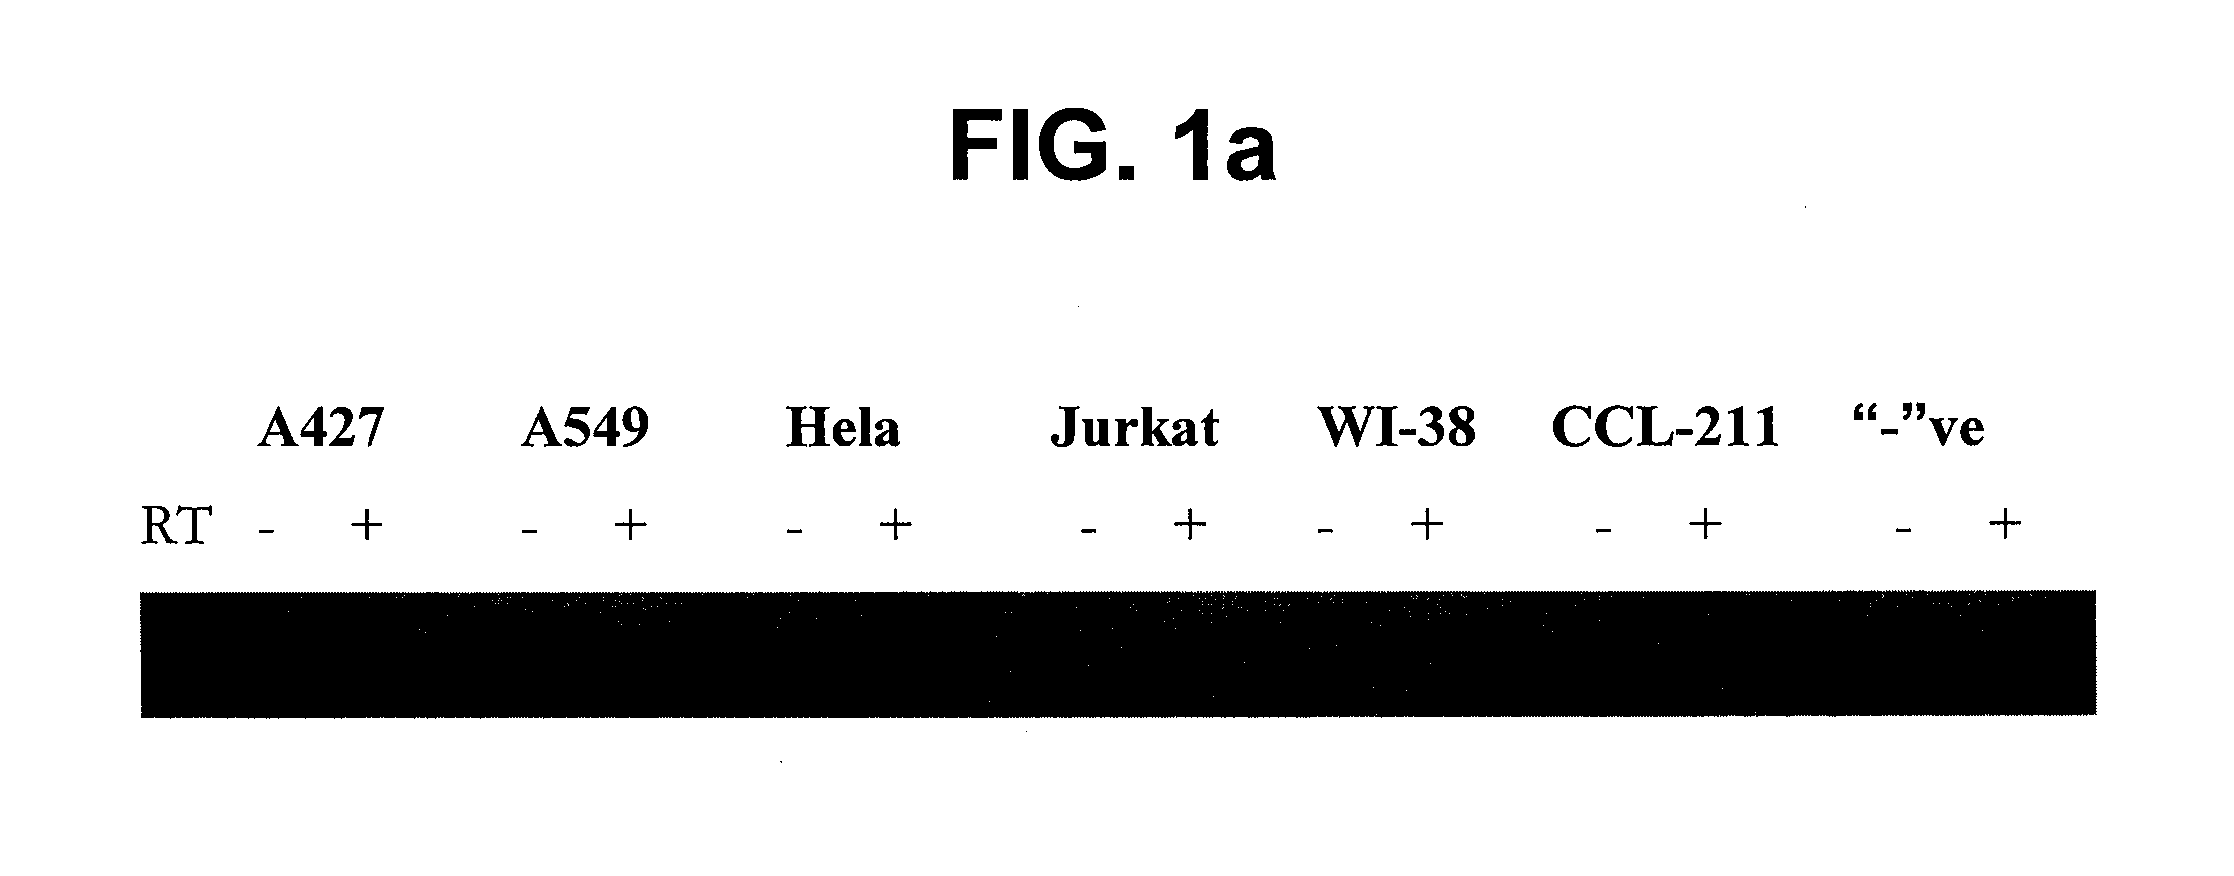 Protein kinase CK2 gene mutations, amplifications and polymorphisms in human cancers and methods of use